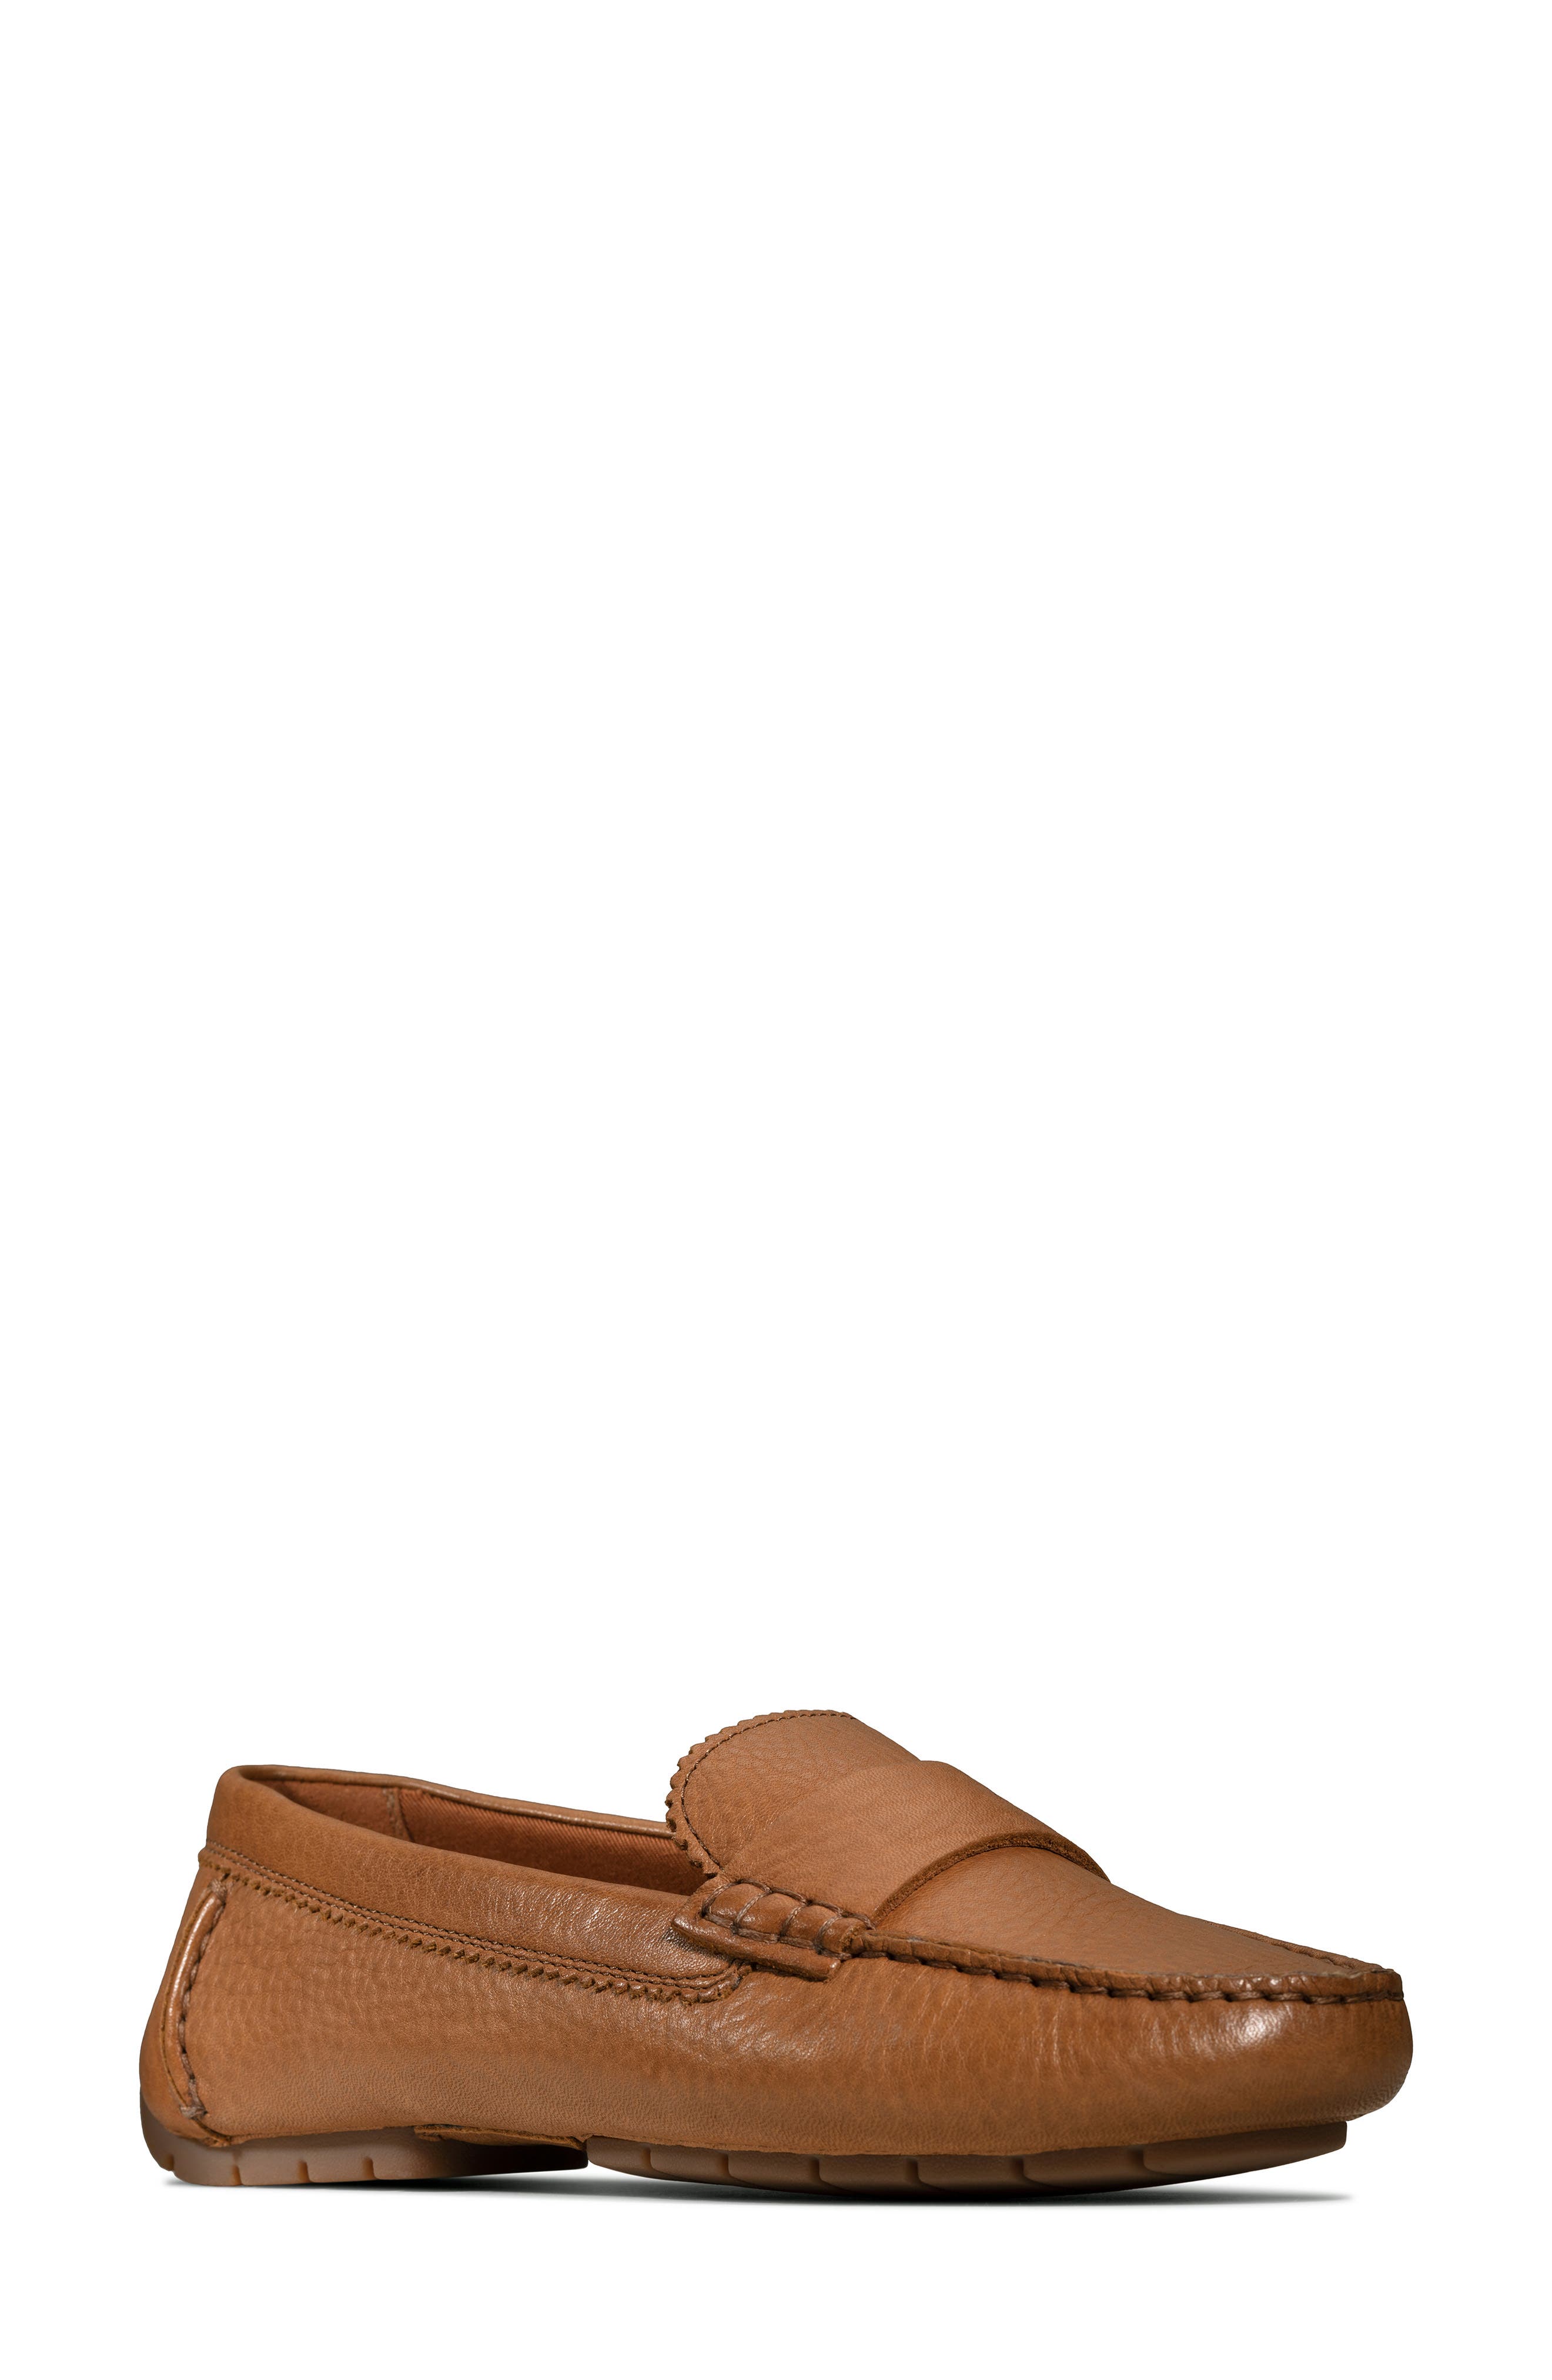 women's moccasins with arch support